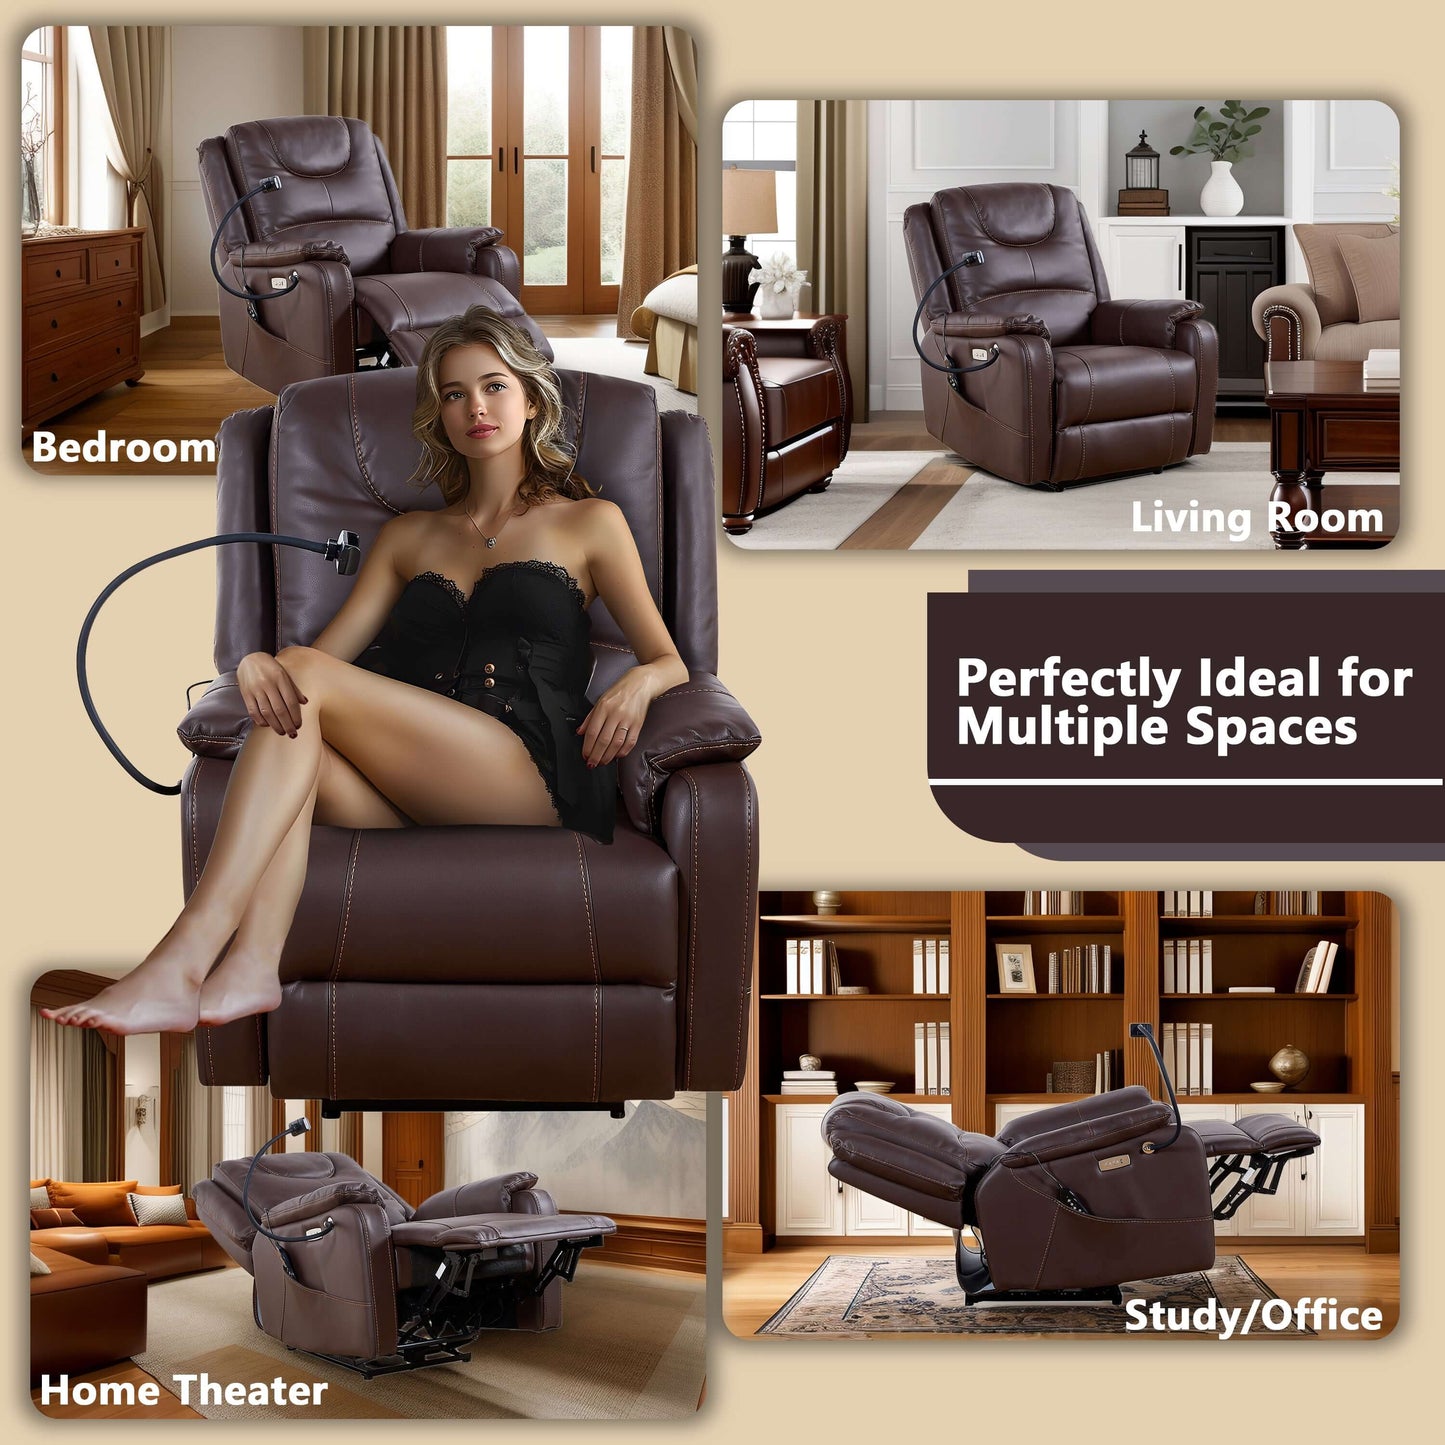 Power Zero Gravity Chair: Electric Recliner with Heat and Massage, Side Pockets,USB Port - Scratch Resistant Eco Leather Reddish Brown